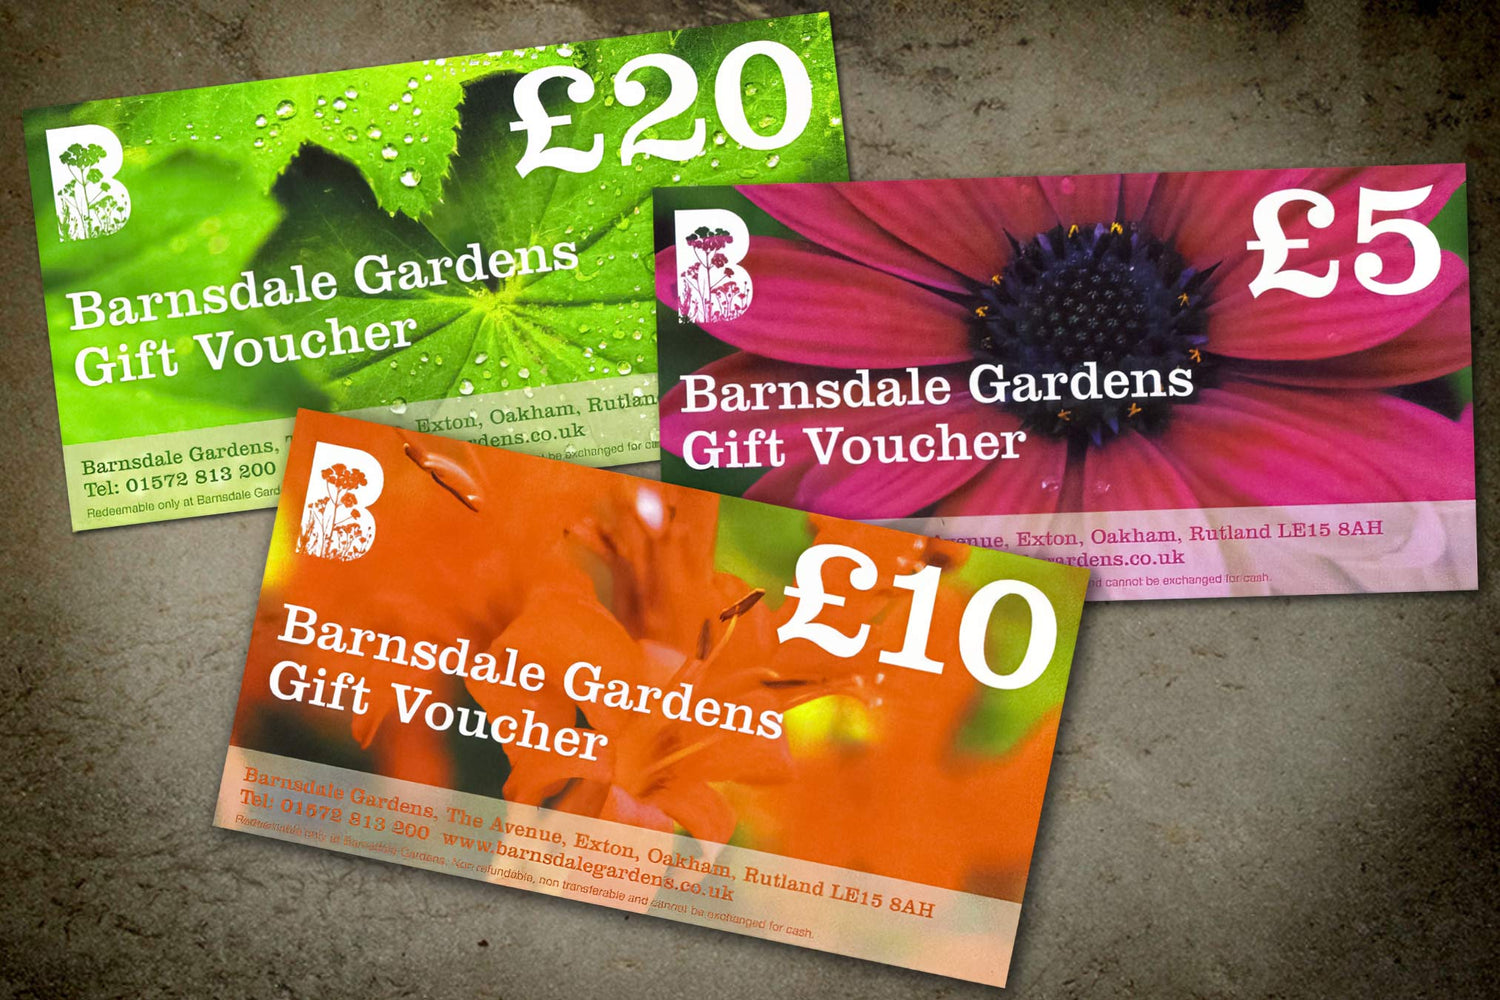 Gift vouchers to spend in the gifts shop, plants nursery, tea room or entry to the gardens at Barnsdale Gardens.